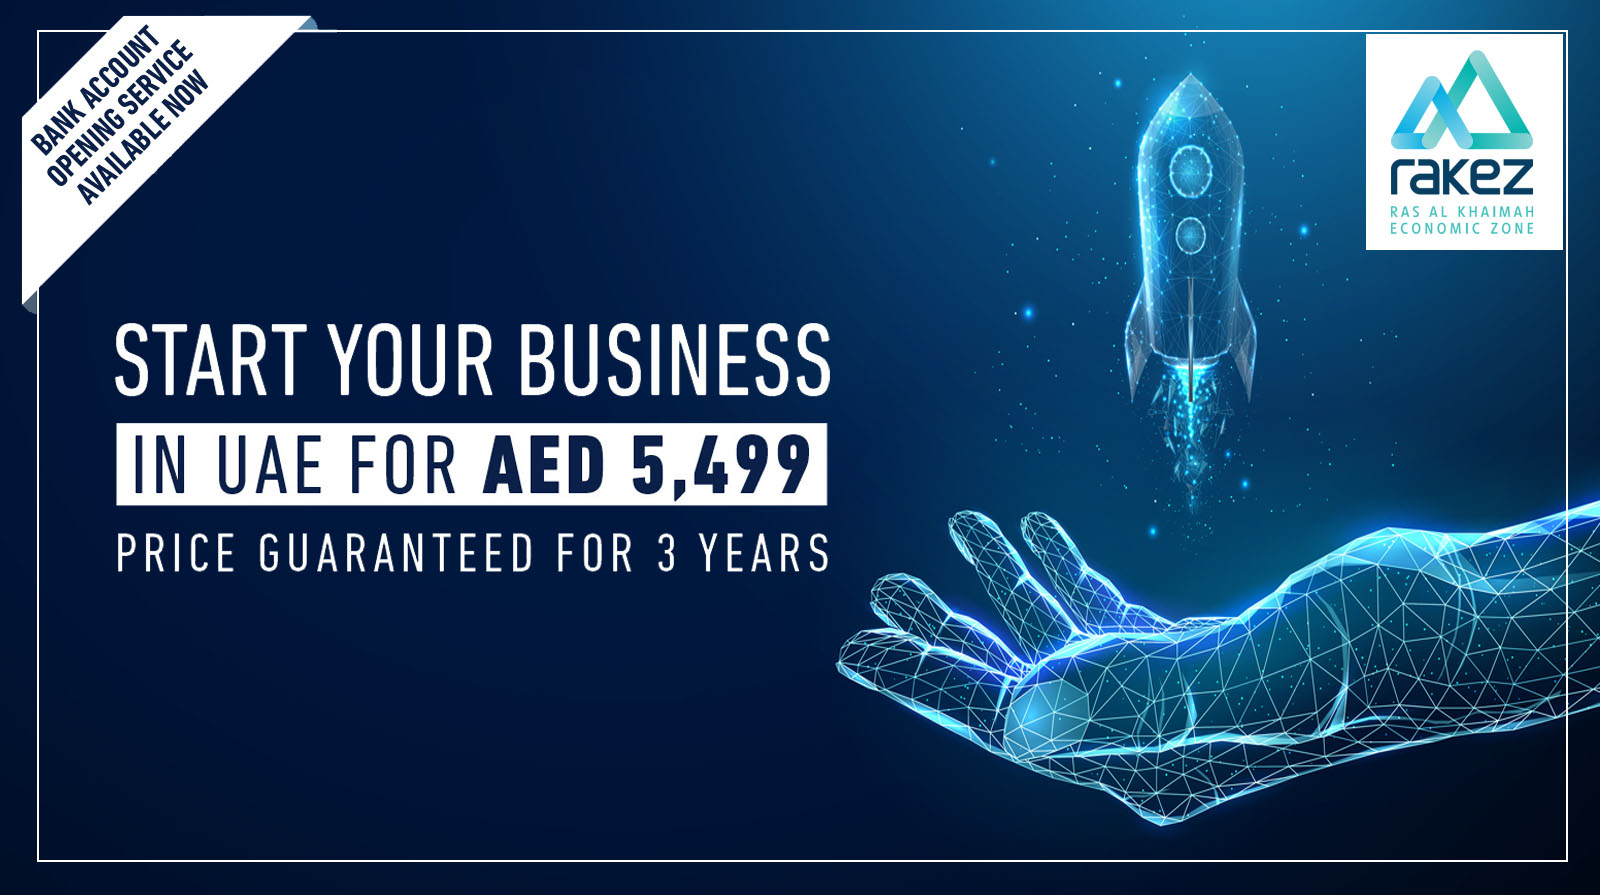 UAE Business Set-Up for just AED 5,499